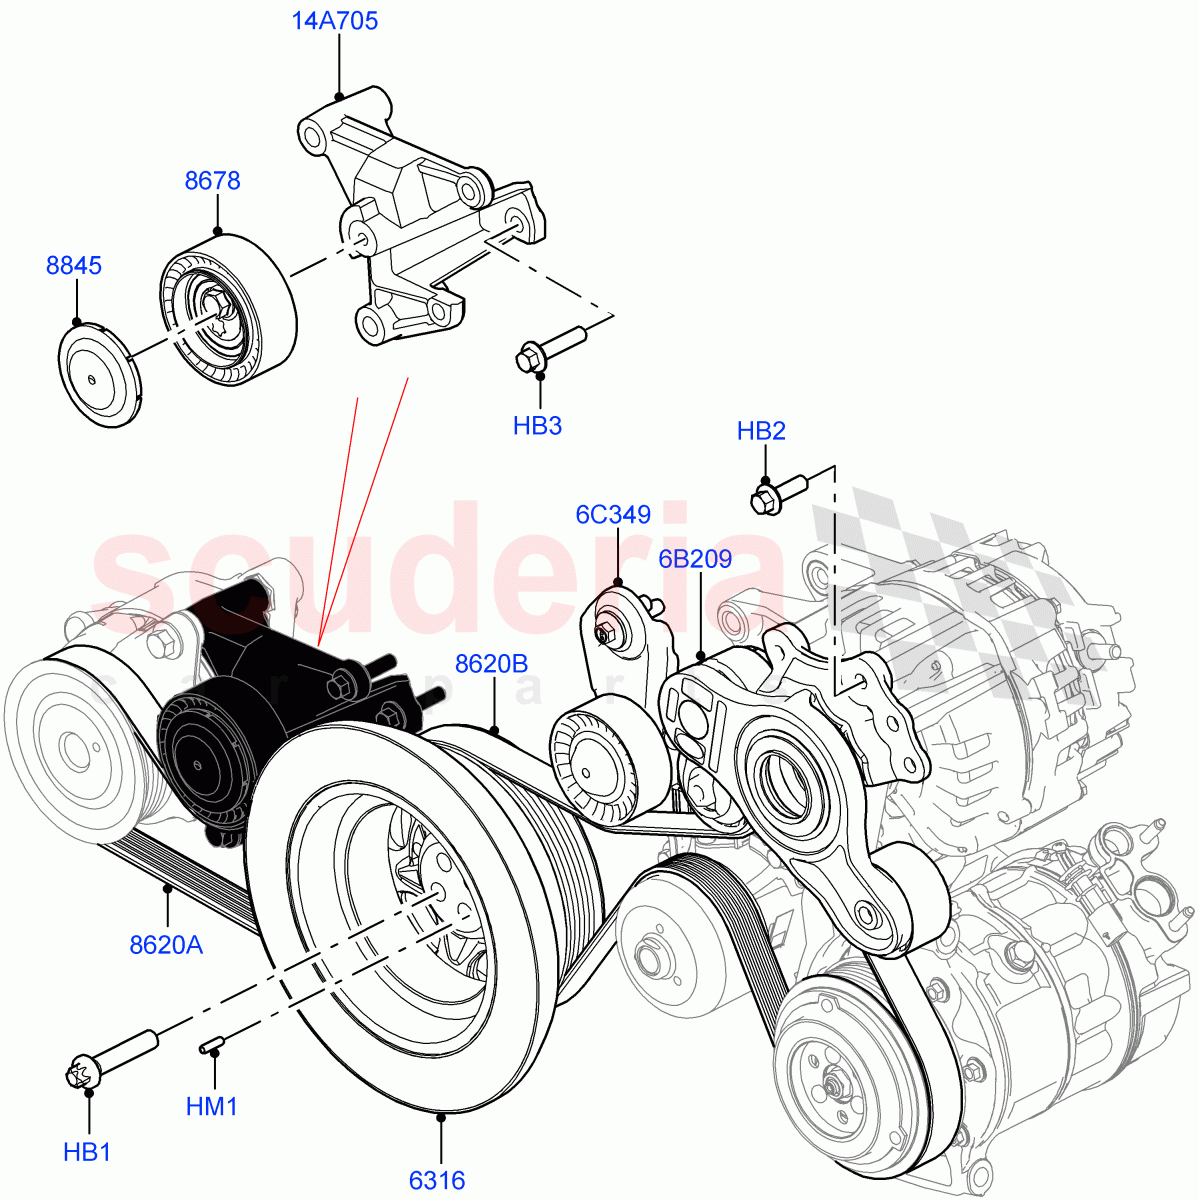 Pulleys And Drive Belts(3.0L AJ20D6 Diesel High,Electronic Air Suspension With ACE)((V)FROMLA000001) of Land Rover Land Rover Range Rover (2012-2021) [3.0 I6 Turbo Diesel AJ20D6]